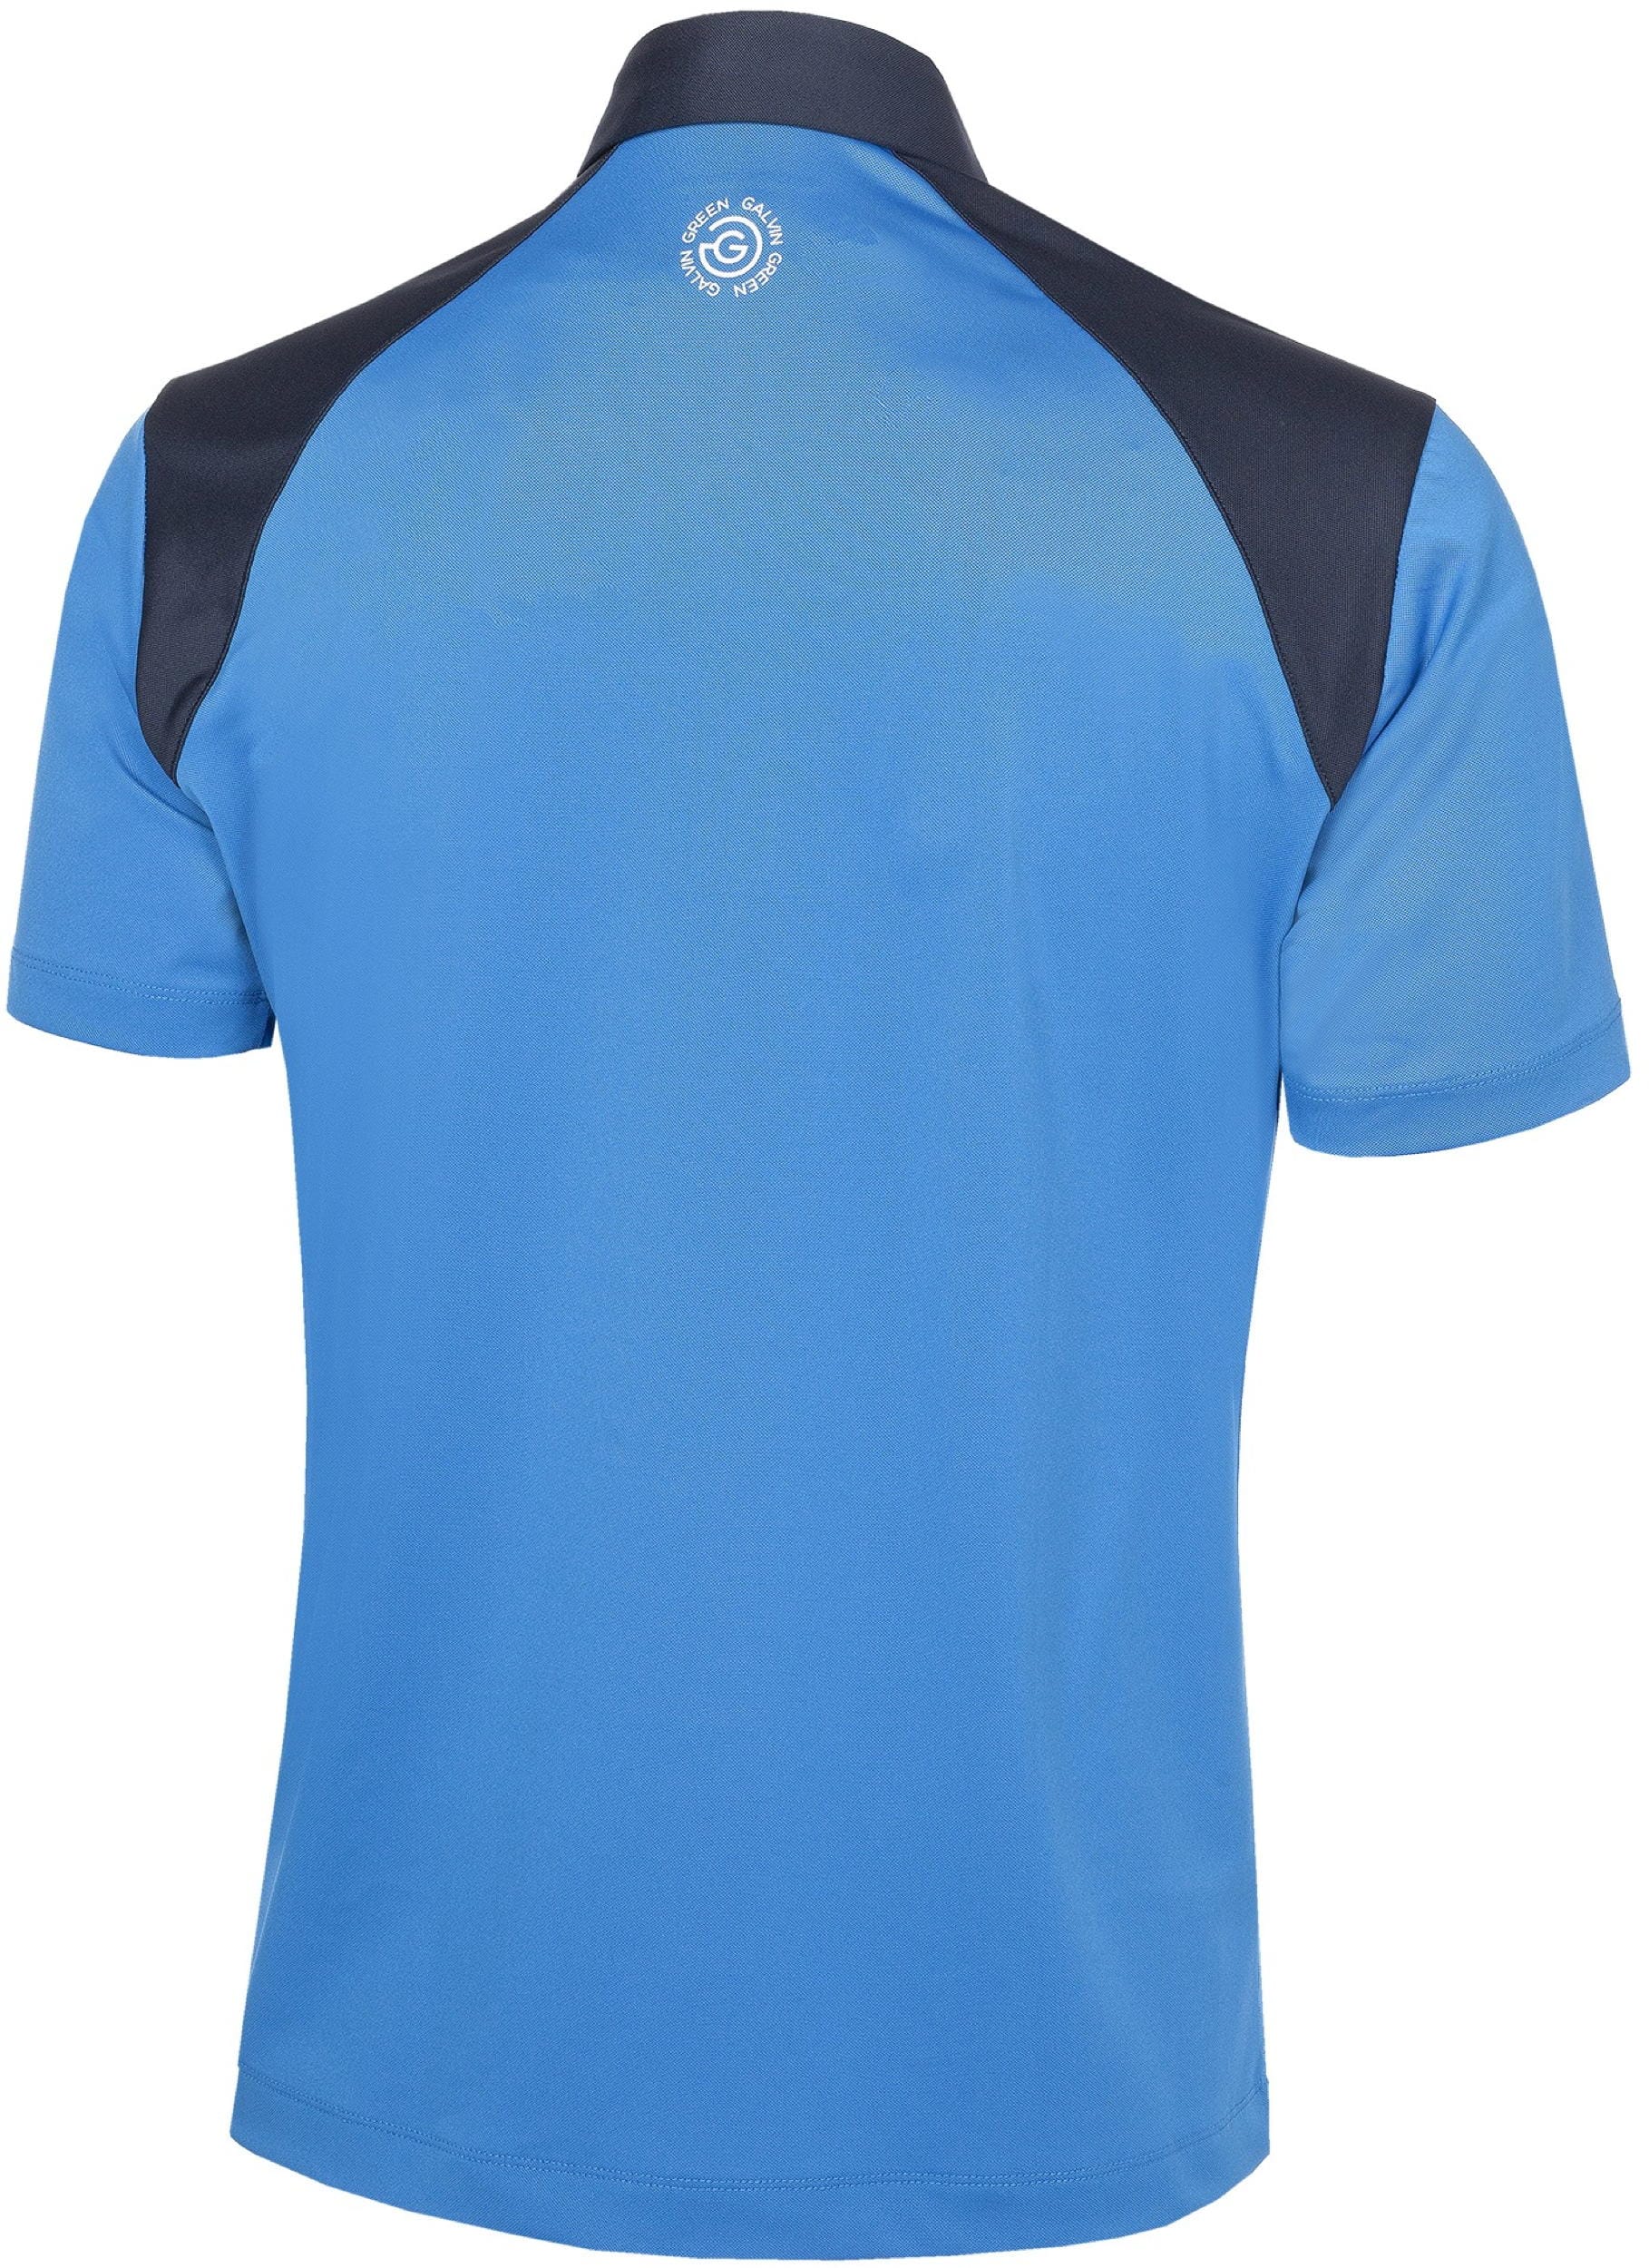 Galvin Green Mapping Ventil8 Plus Polo, blue/navy/white